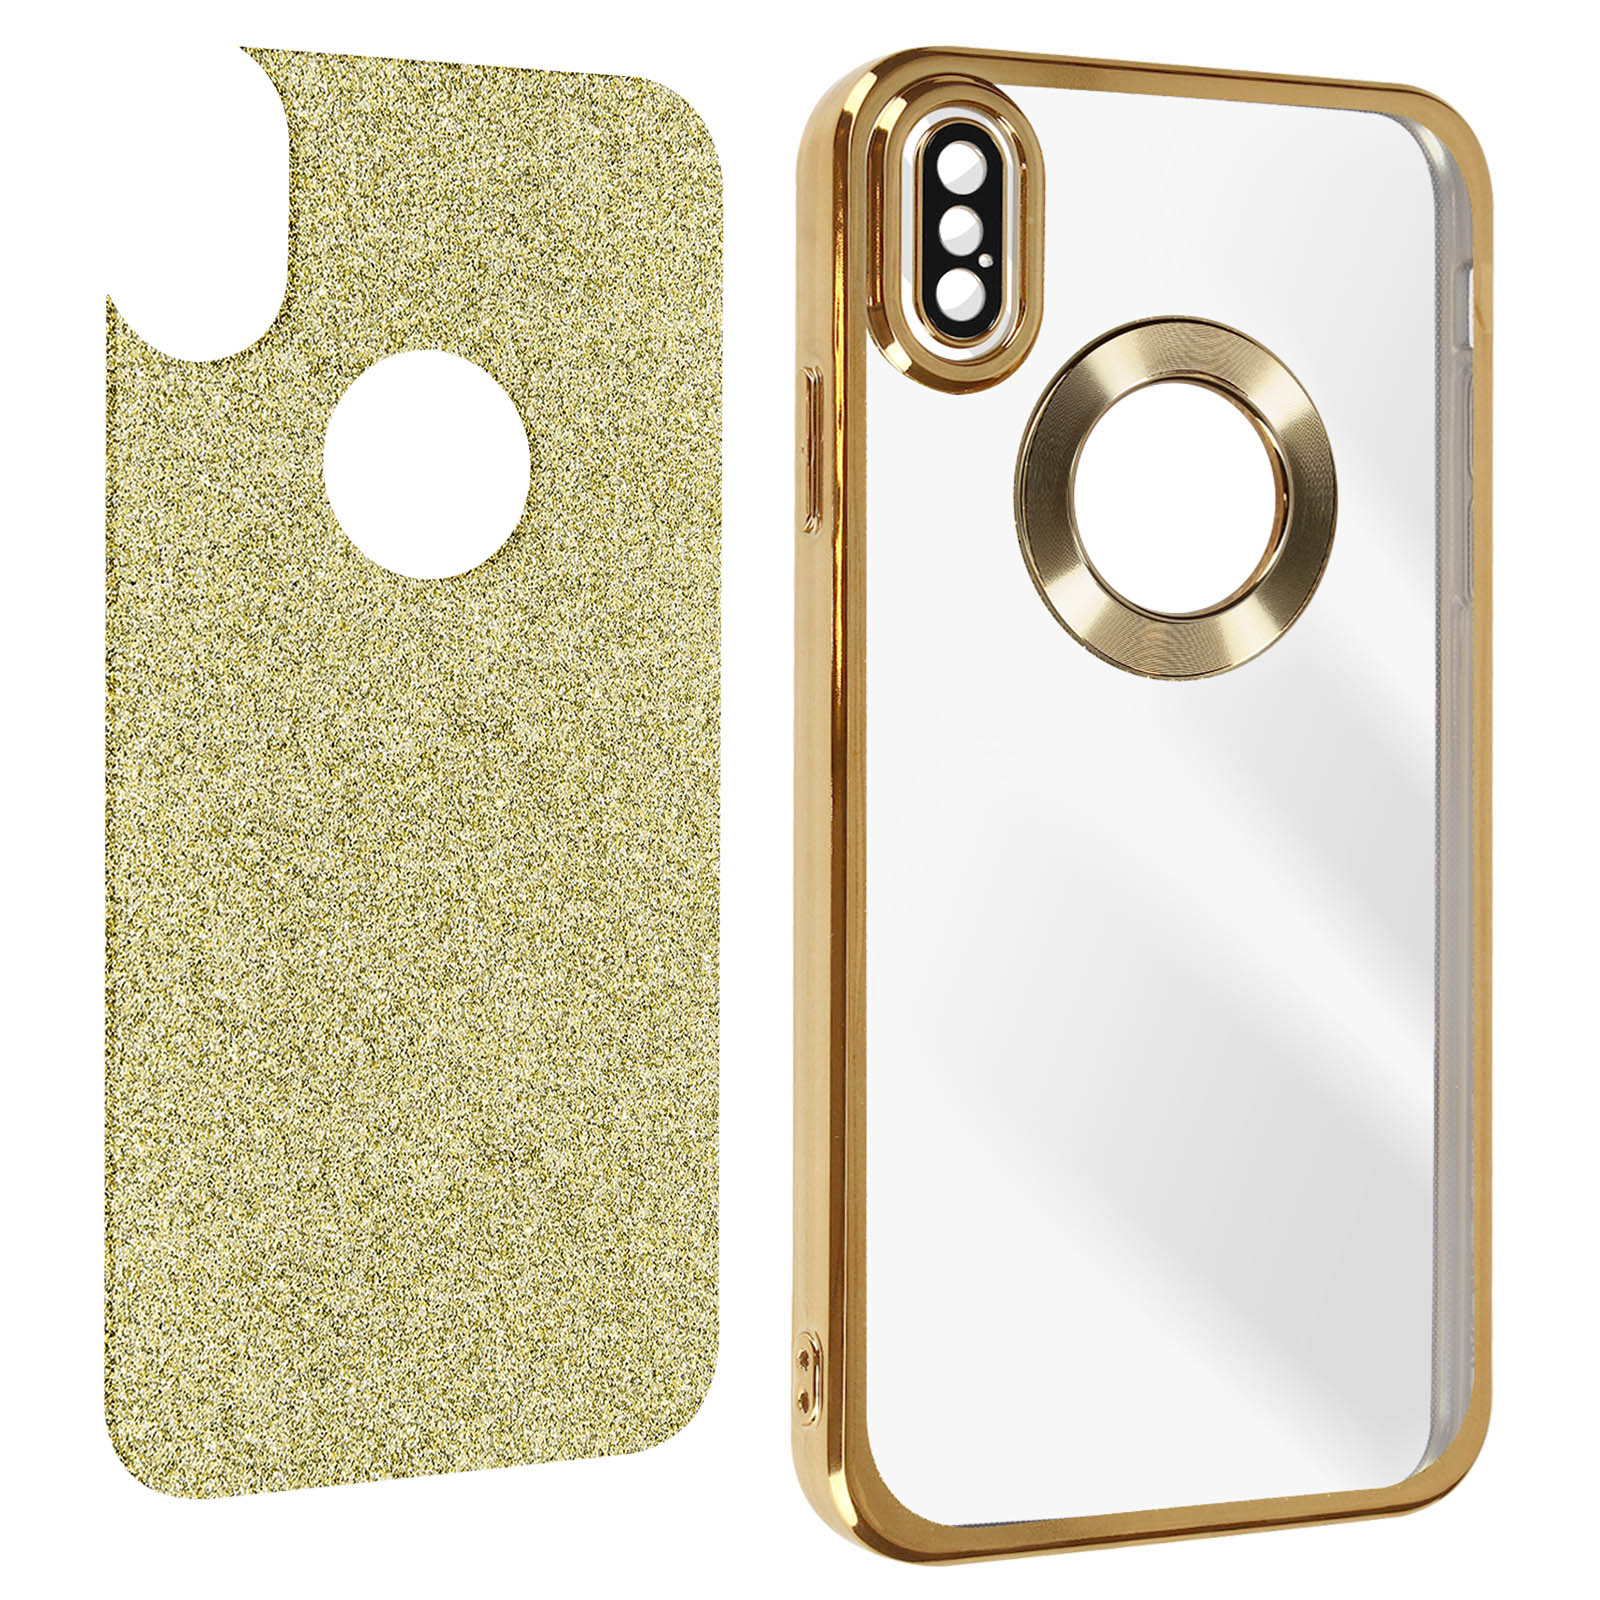 Protecam Spark Apple, Gold Backcover, iPhone XS, Series, AVIZAR